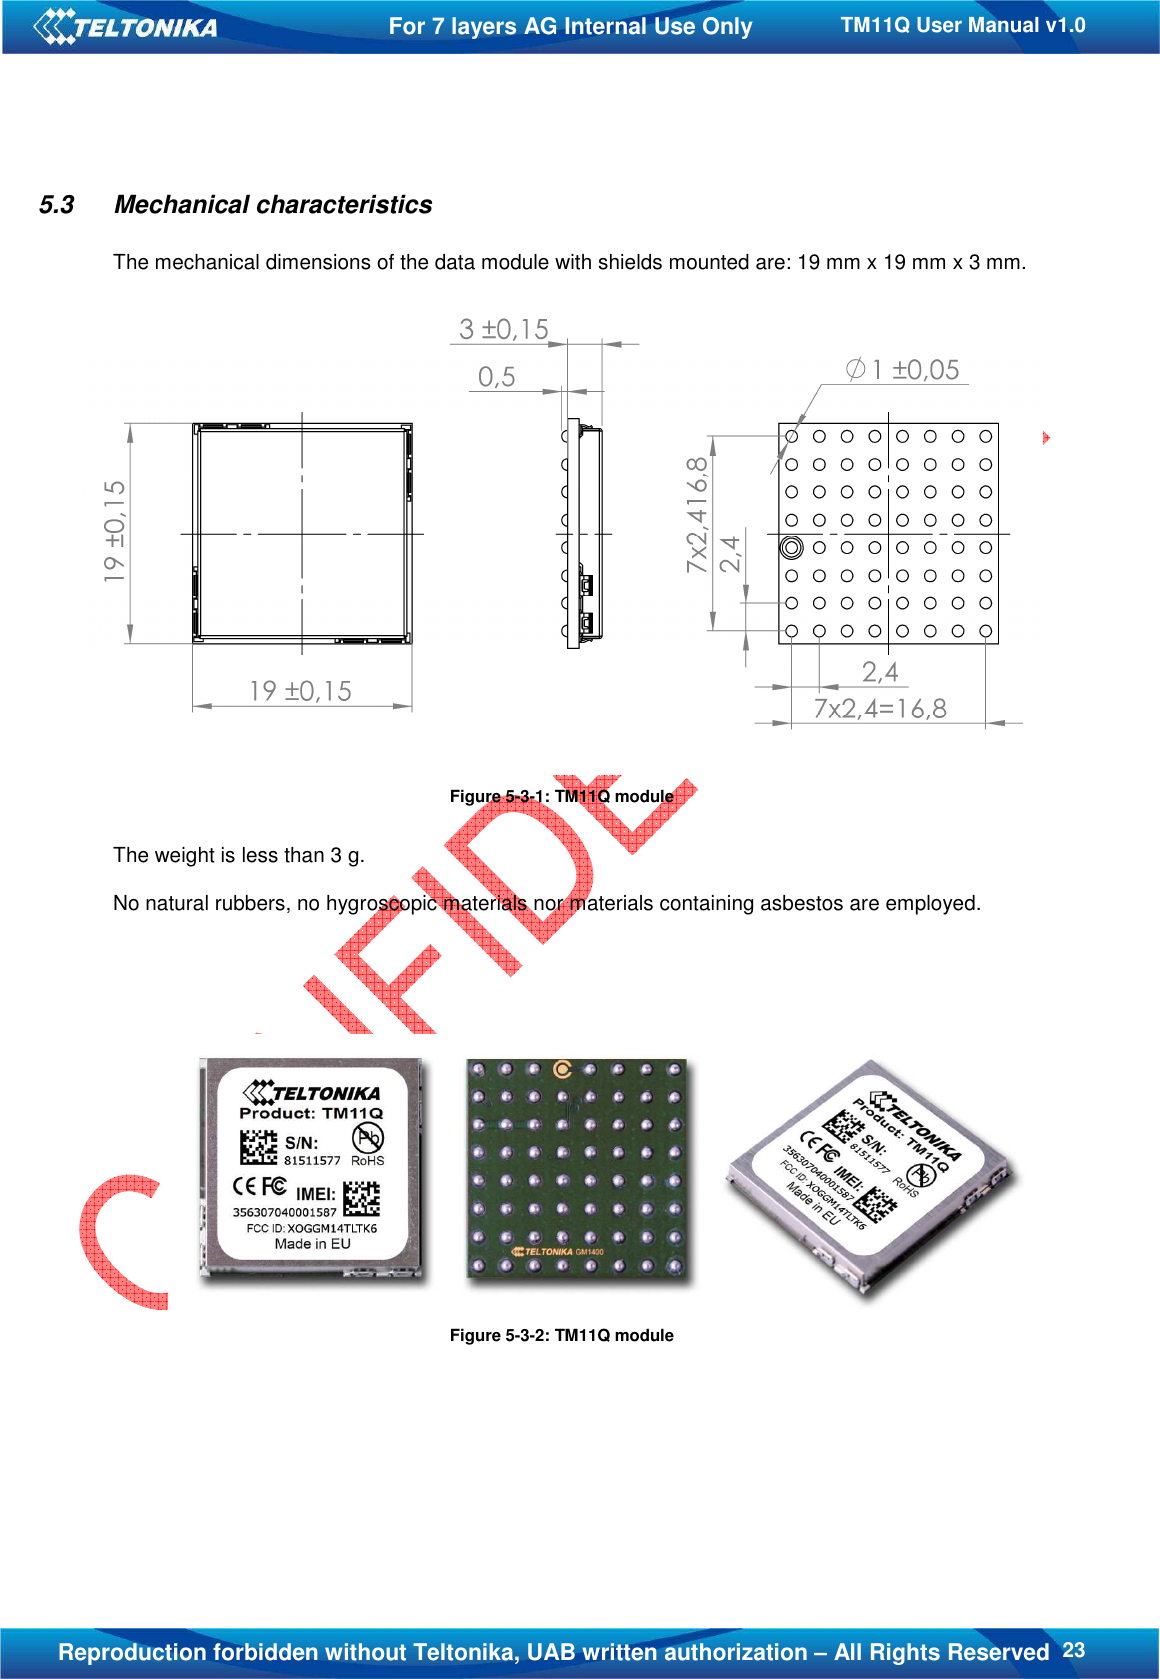   23TM11Q User Manual v1.0 For 7 layers AG Internal Use Only  Reproduction forbidden without Teltonika, UAB written authorization – All Rights Reserved 5.3  Mechanical characteristics  The mechanical dimensions of the data module with shields mounted are: 19 mm x 19 mm x 3 mm.   Figure 5-3-1: TM11Q module  The weight is less than 3 g.  No natural rubbers, no hygroscopic materials nor materials containing asbestos are employed.       Figure 5-3-2: TM11Q module      